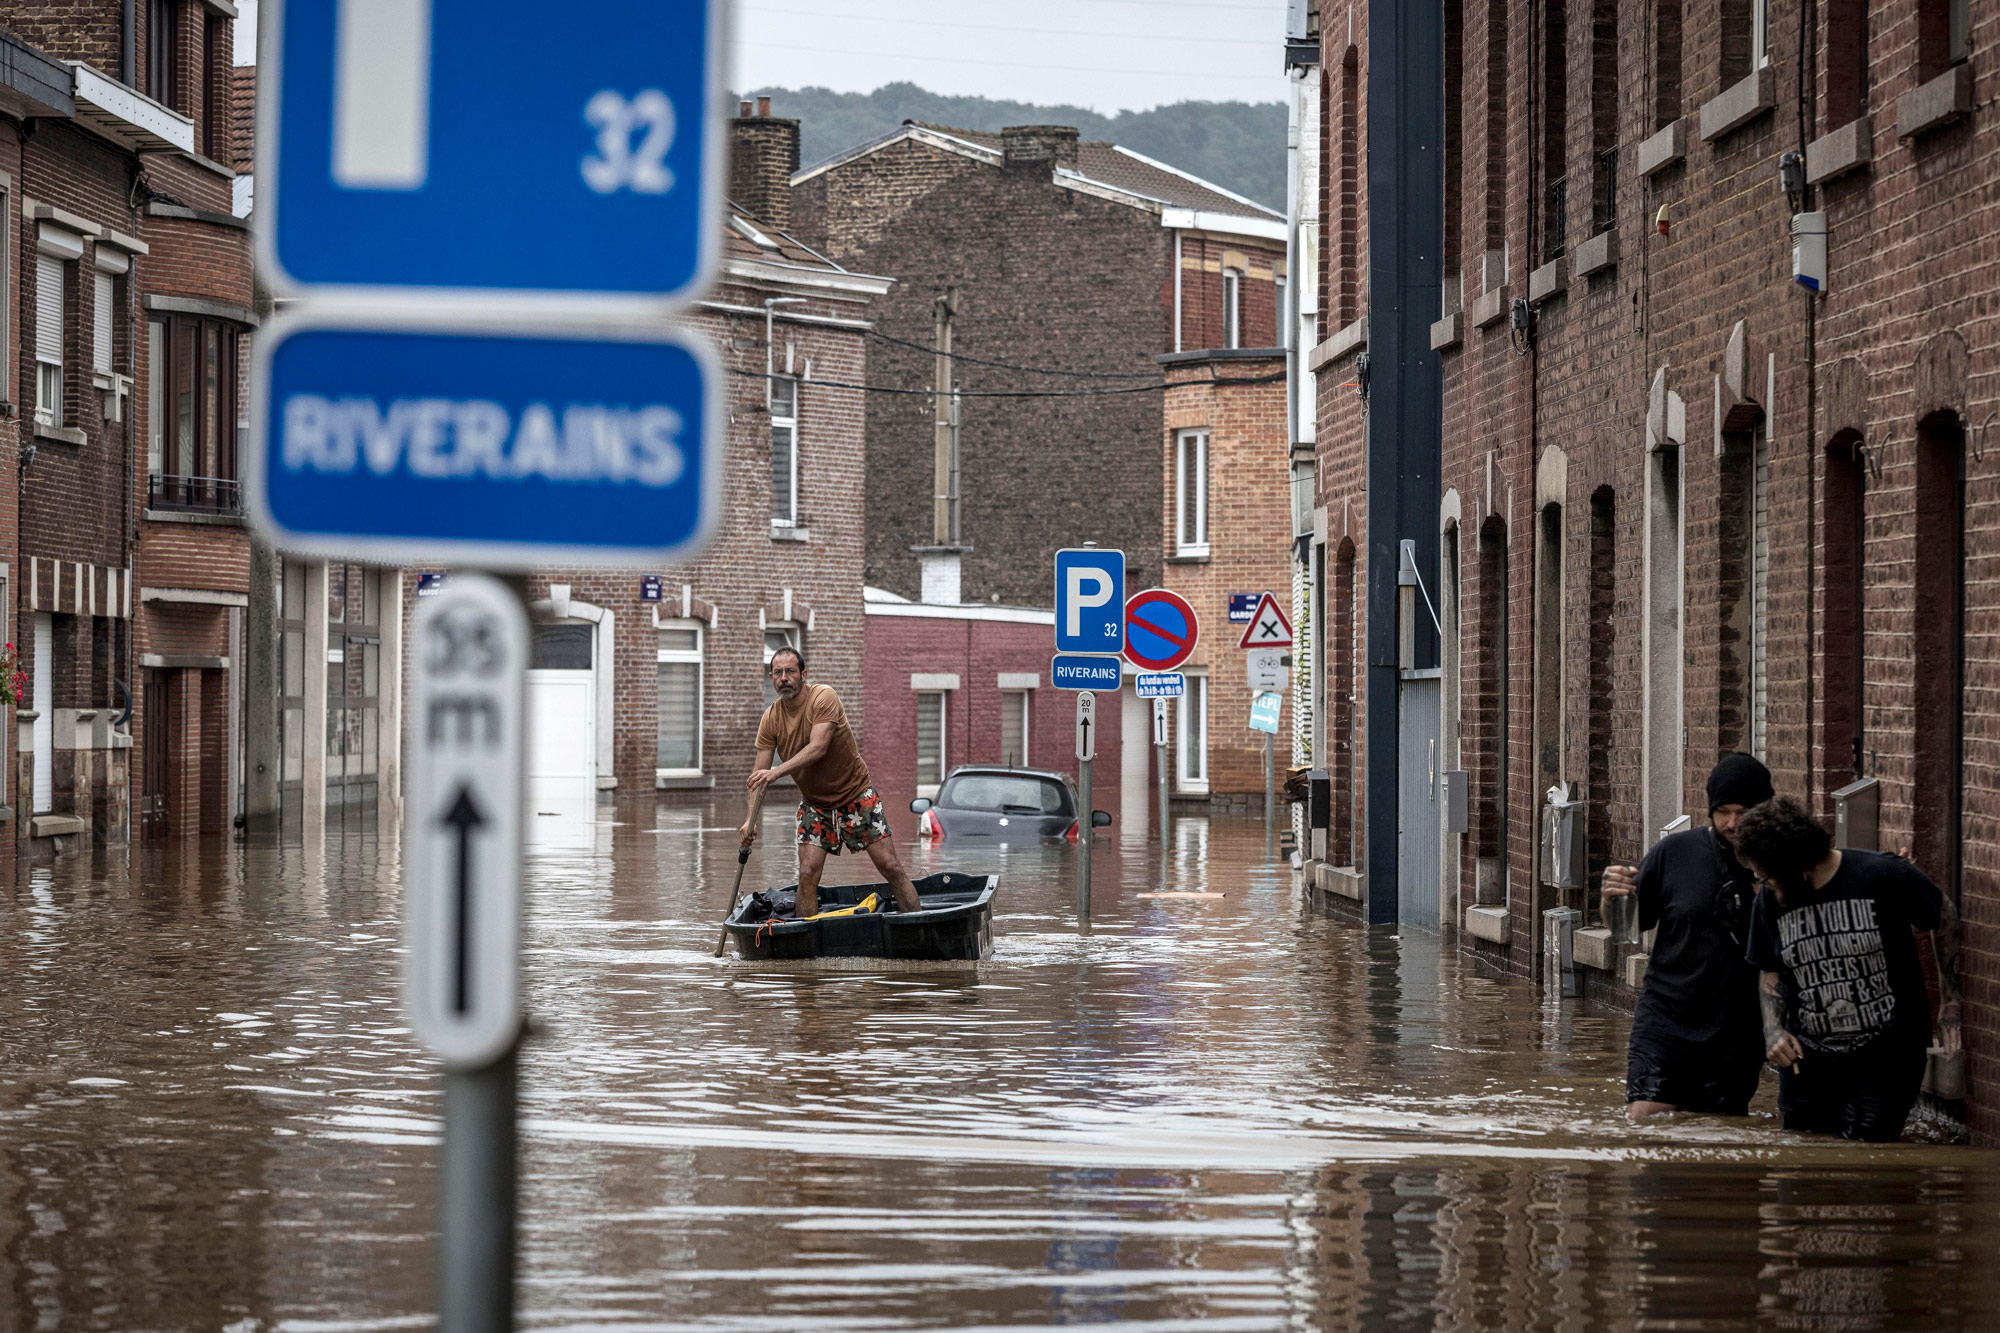 A man rows a boat down a residential street after flooding in Angleur, Province of Liege, Belgium, on July 16.